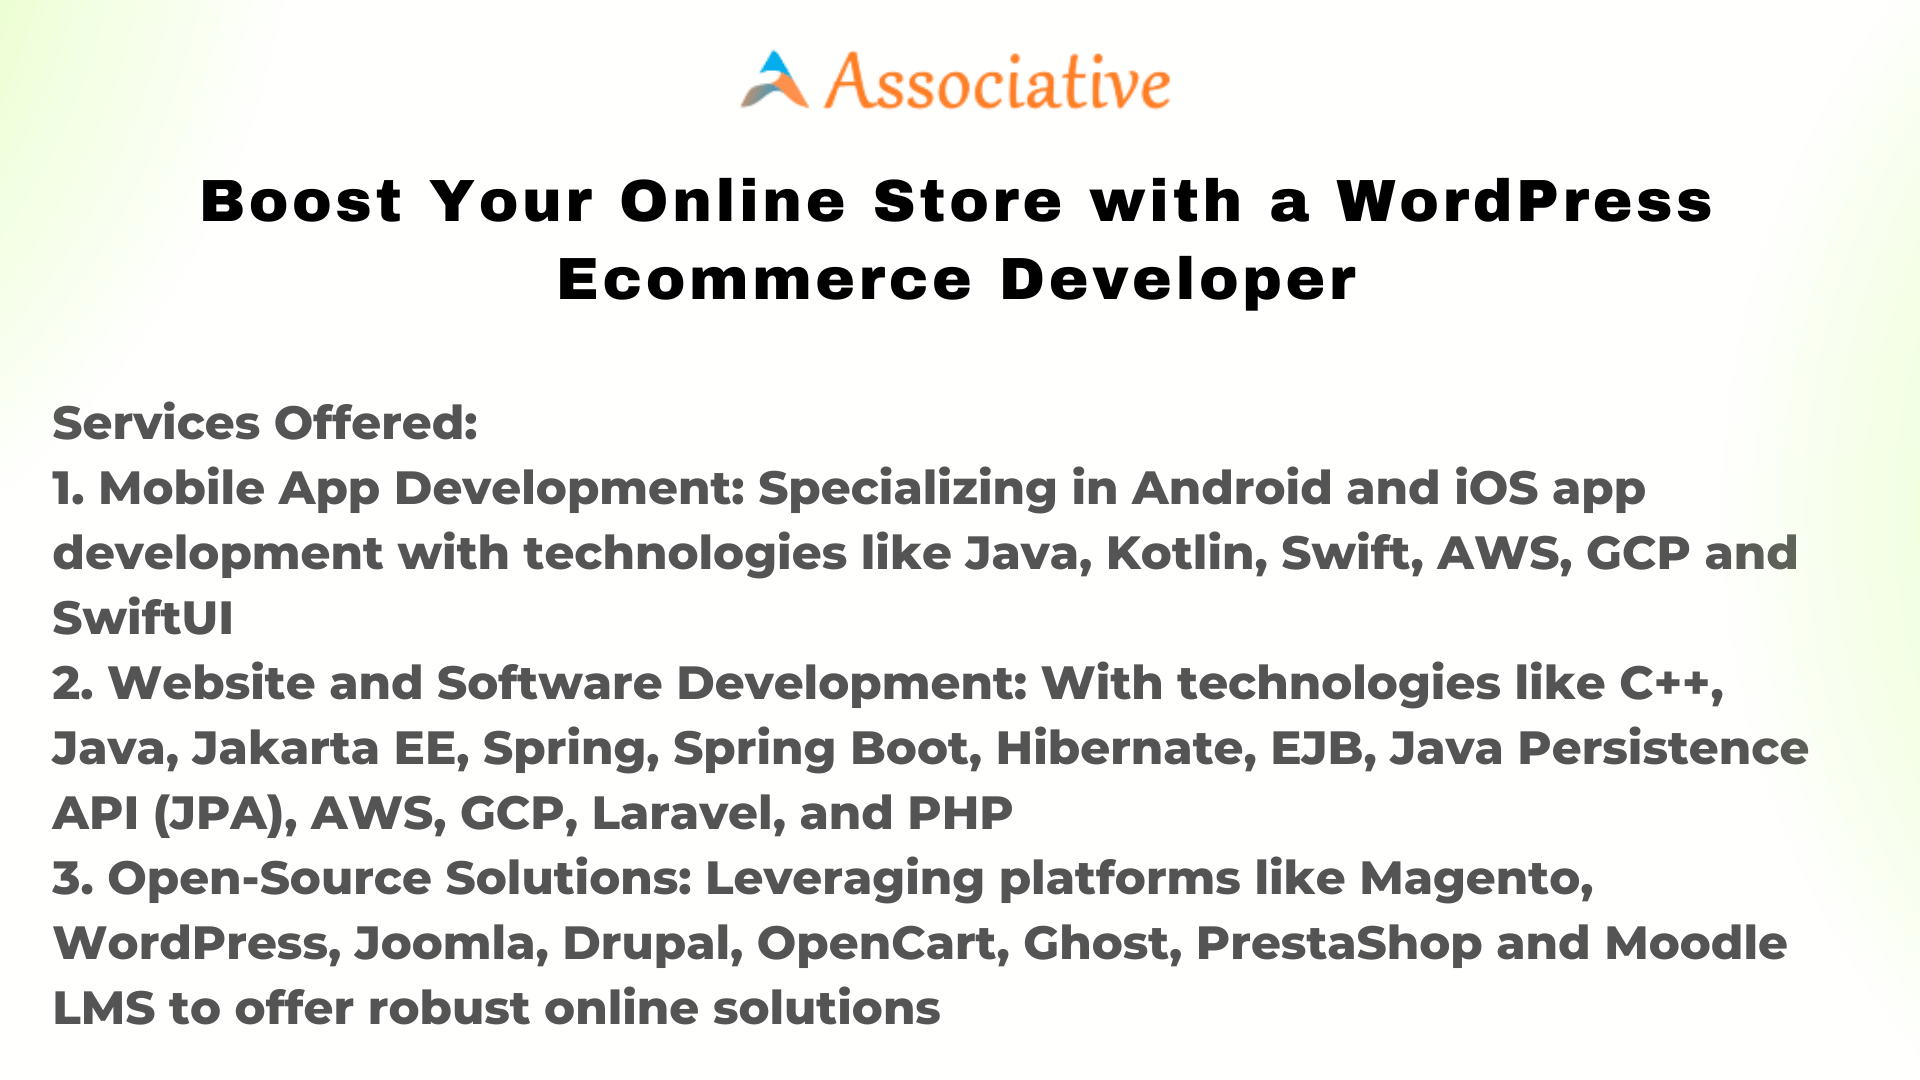 Boost Your Online Store with a WordPress Ecommerce Developer